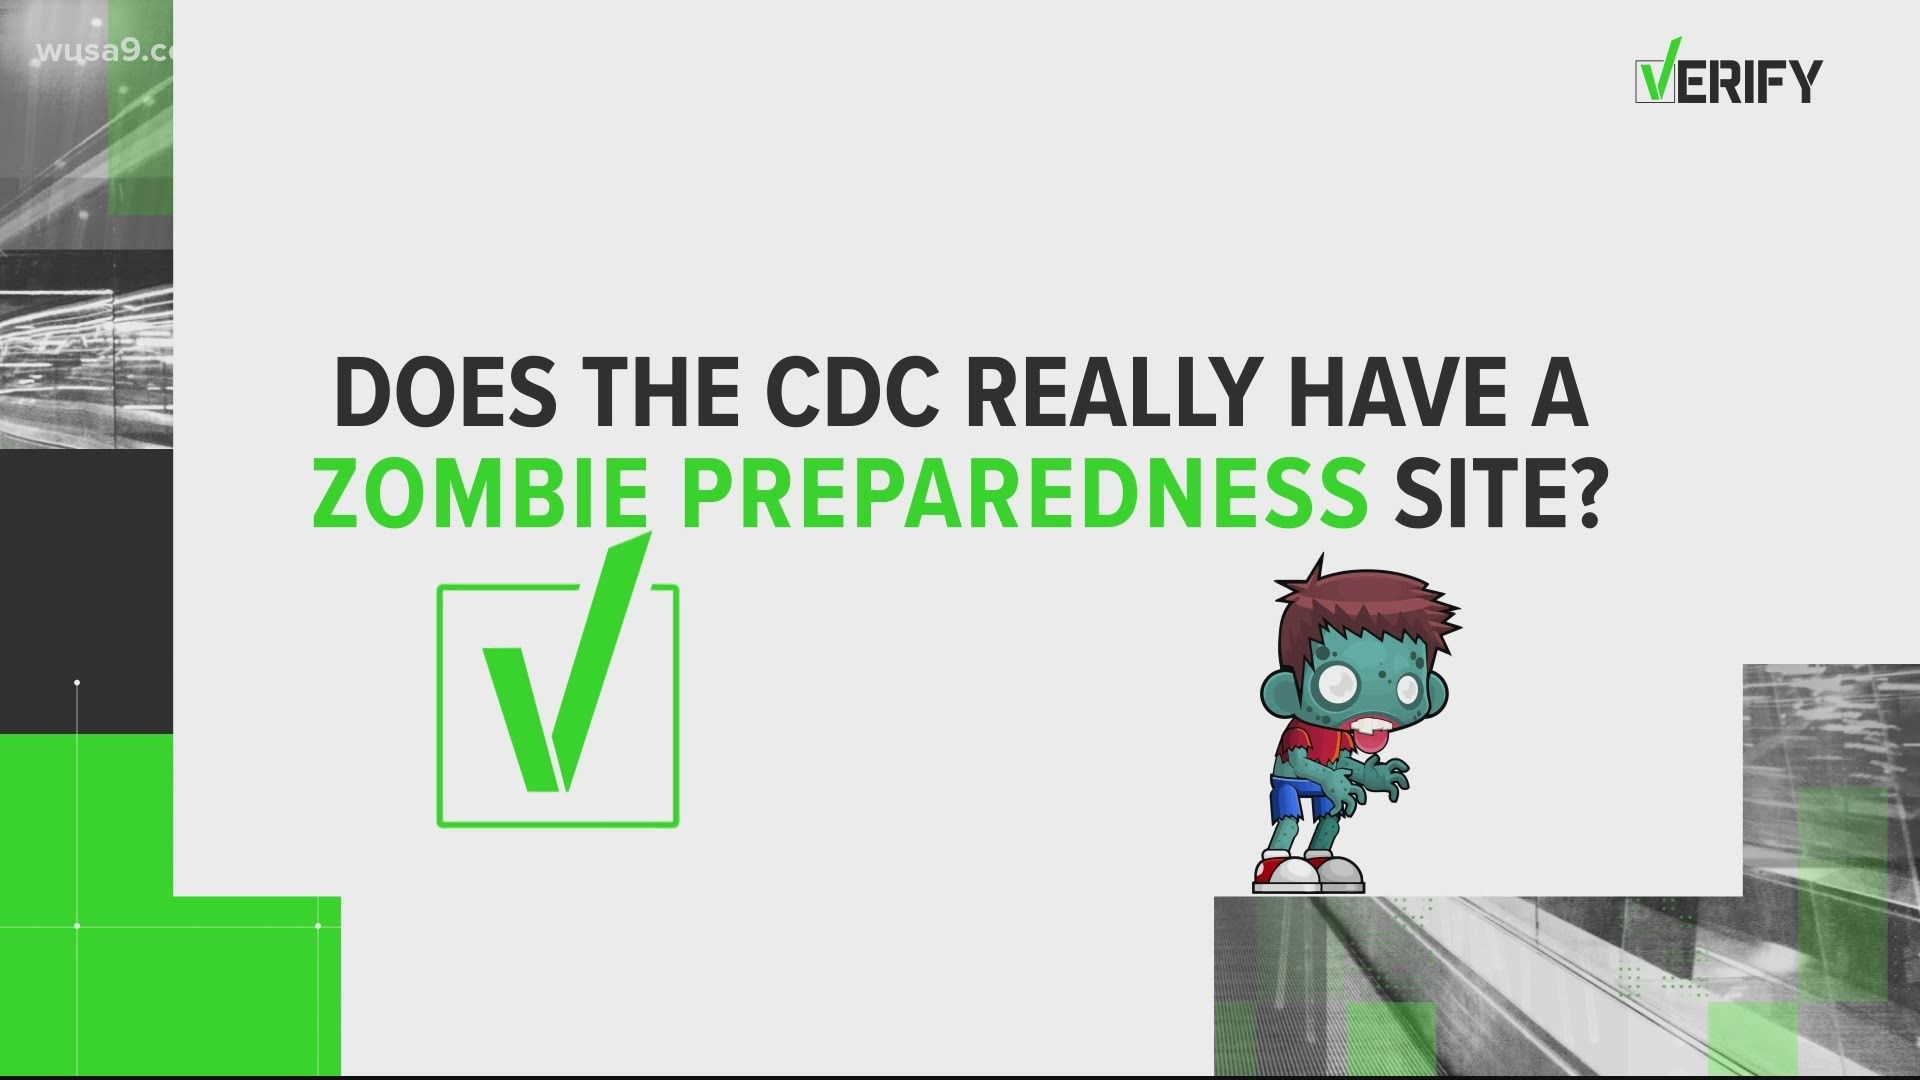 The Verify team exists to give you the facts, and so does the CDC -- even for zombie apocalypses. Here's what the guidelines really say.